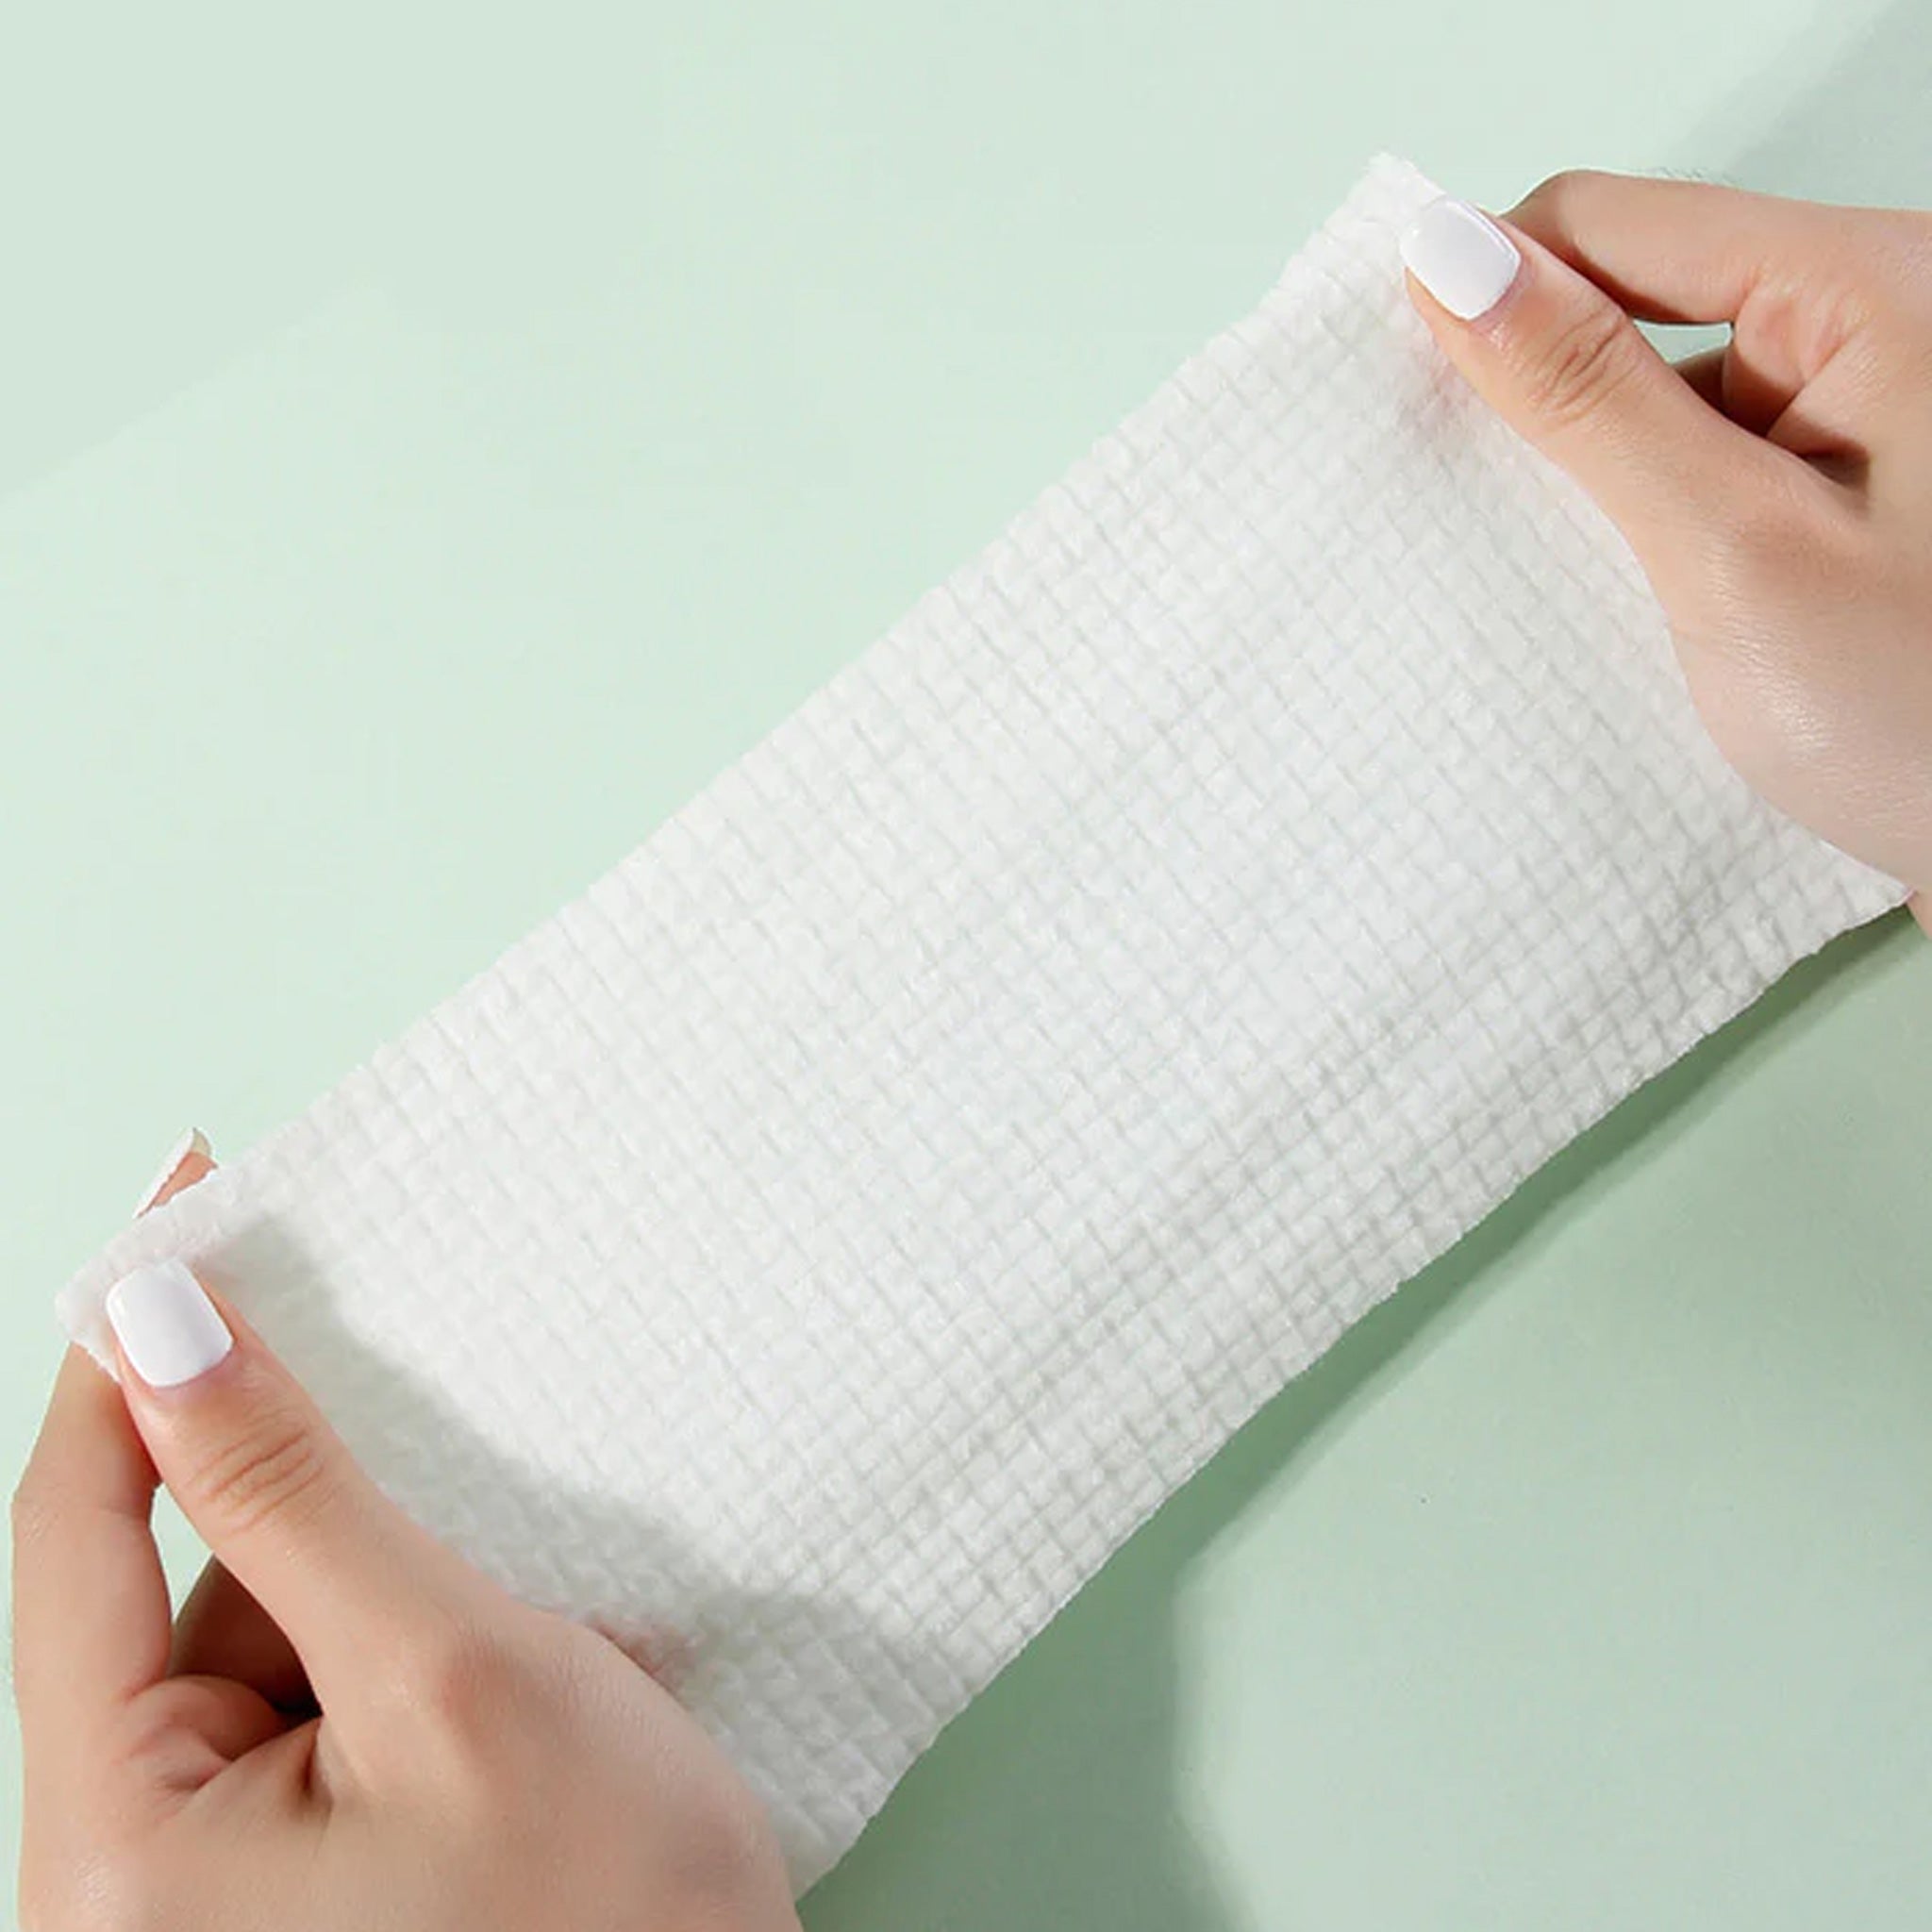 AMORTALS Thickened Disposable Beauty Salon Extractable Roll Washcloths 70pcs